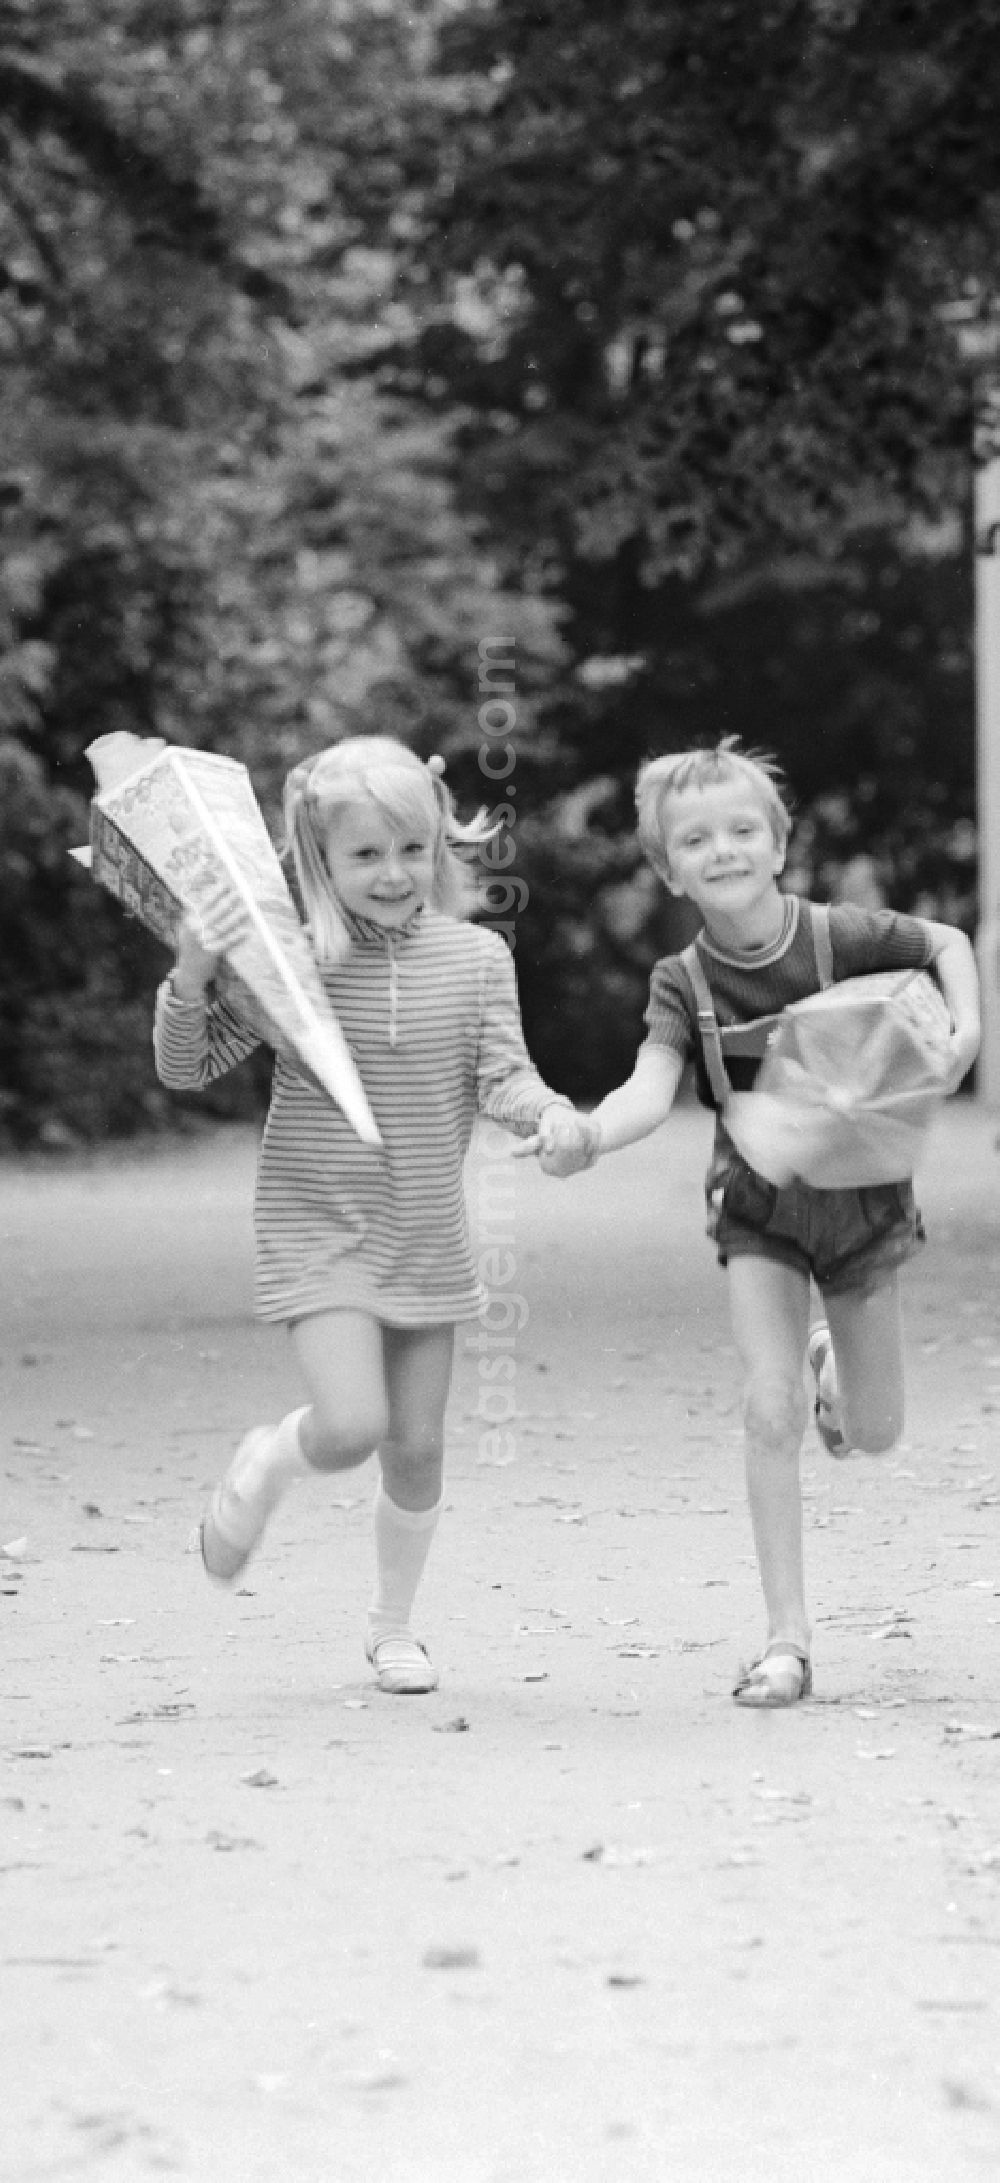 GDR photo archive: Berlin - Two first graders with their bags of sugar in Berlin, the former capital of the GDR, German Democratic Republic